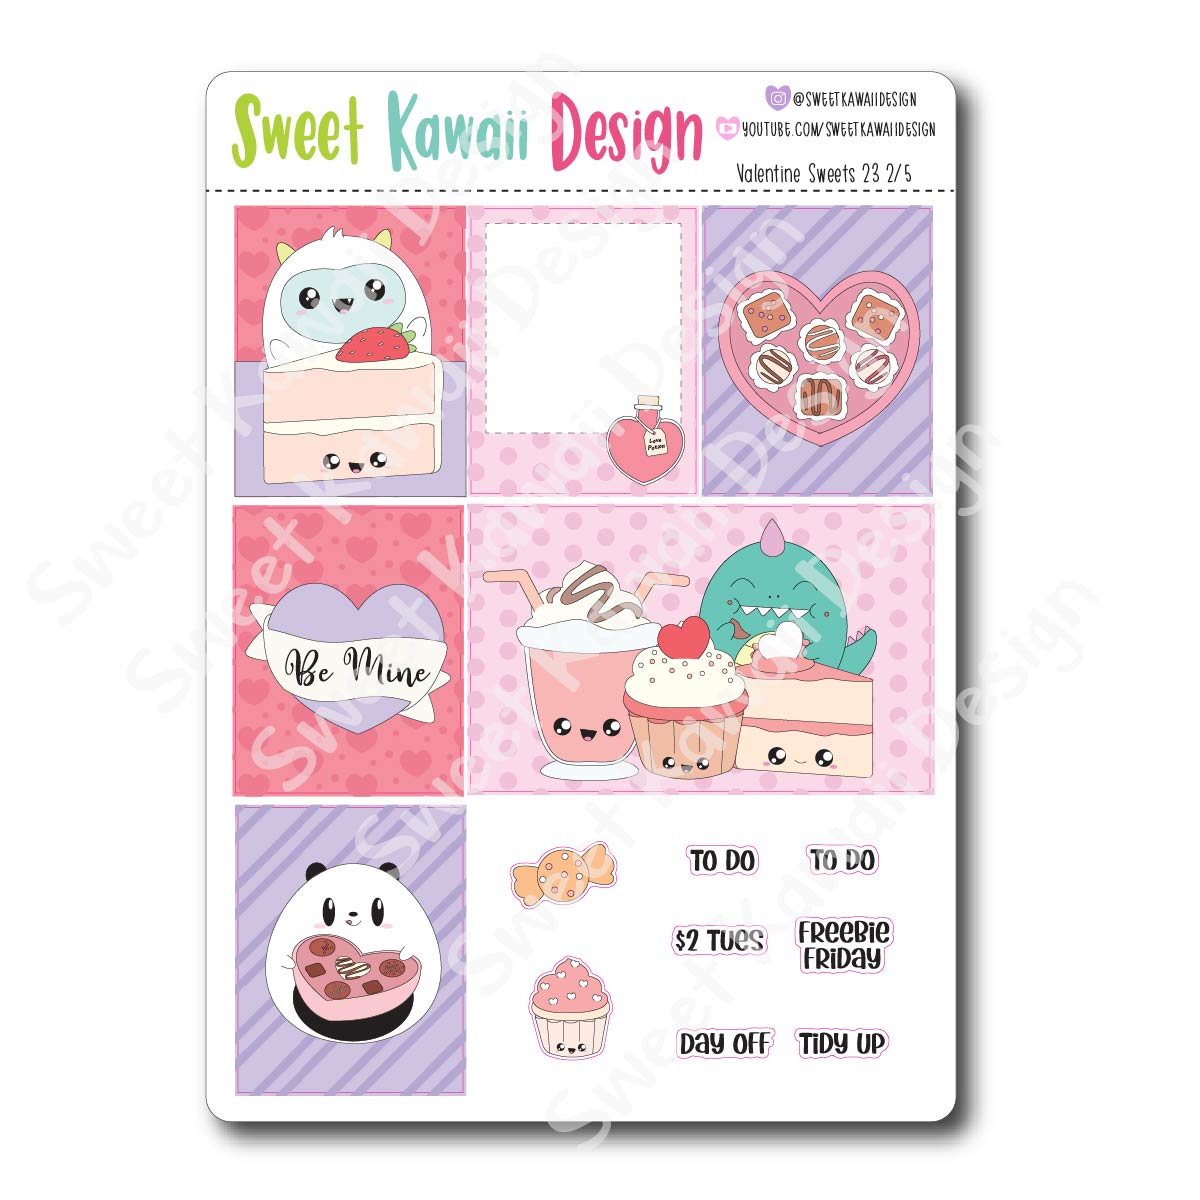 Weekly Kit  - Valentine Sweets COUSIN